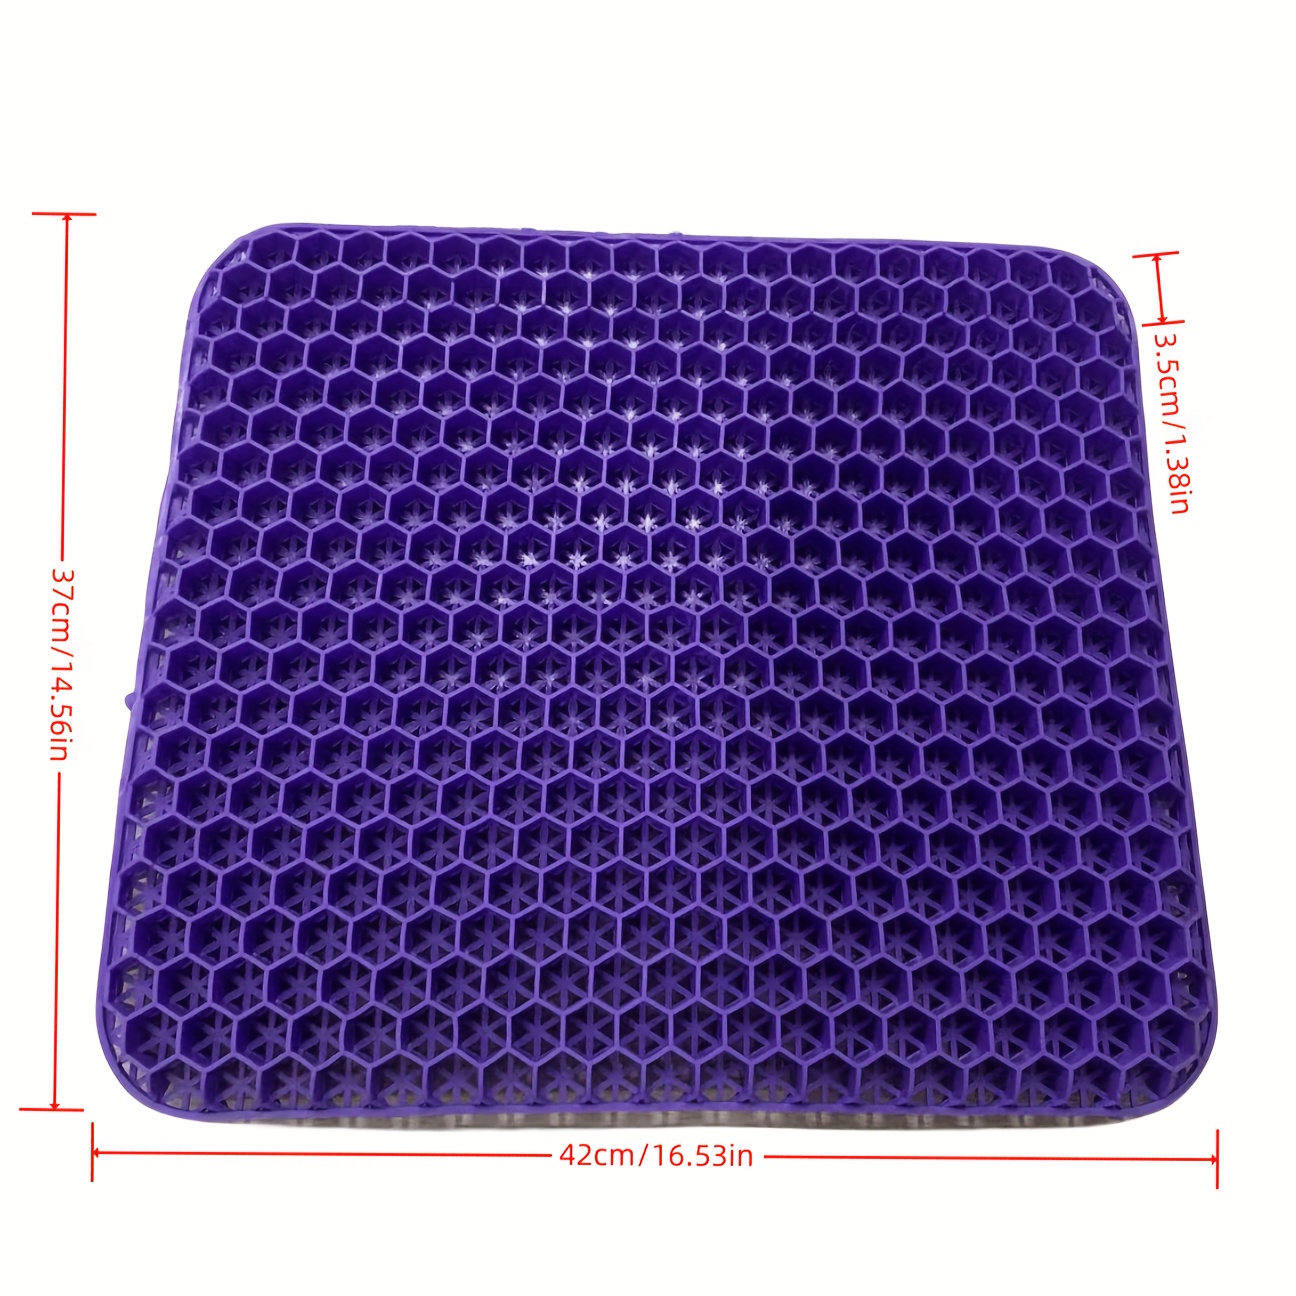 1pc Purple Thickening Gel Seat Cushion Breathable Honeycomb For Cool Down  Pressure Relief Back Tailbone Pain Home Office Car Chair Mat Accessories